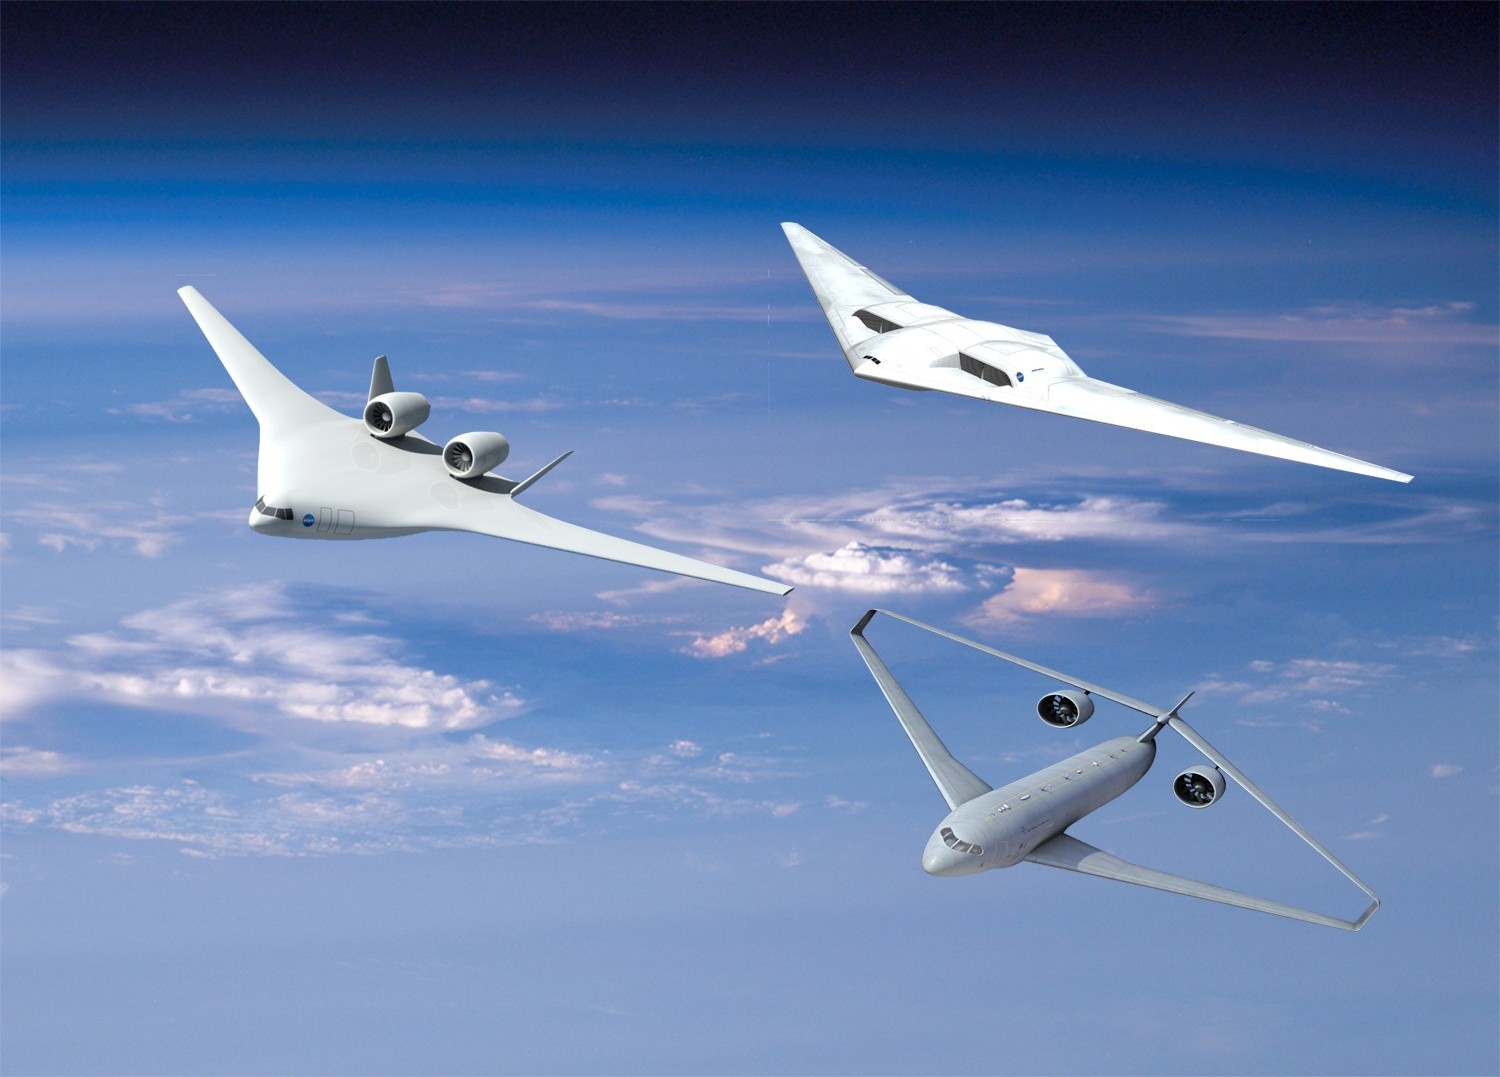 NASA, Boeing, Lockheed Martin, Northrop Grumman, and Style of Speed→ Green Aircrafts inclusive BWB-1/White Eagle (Image by NASA)